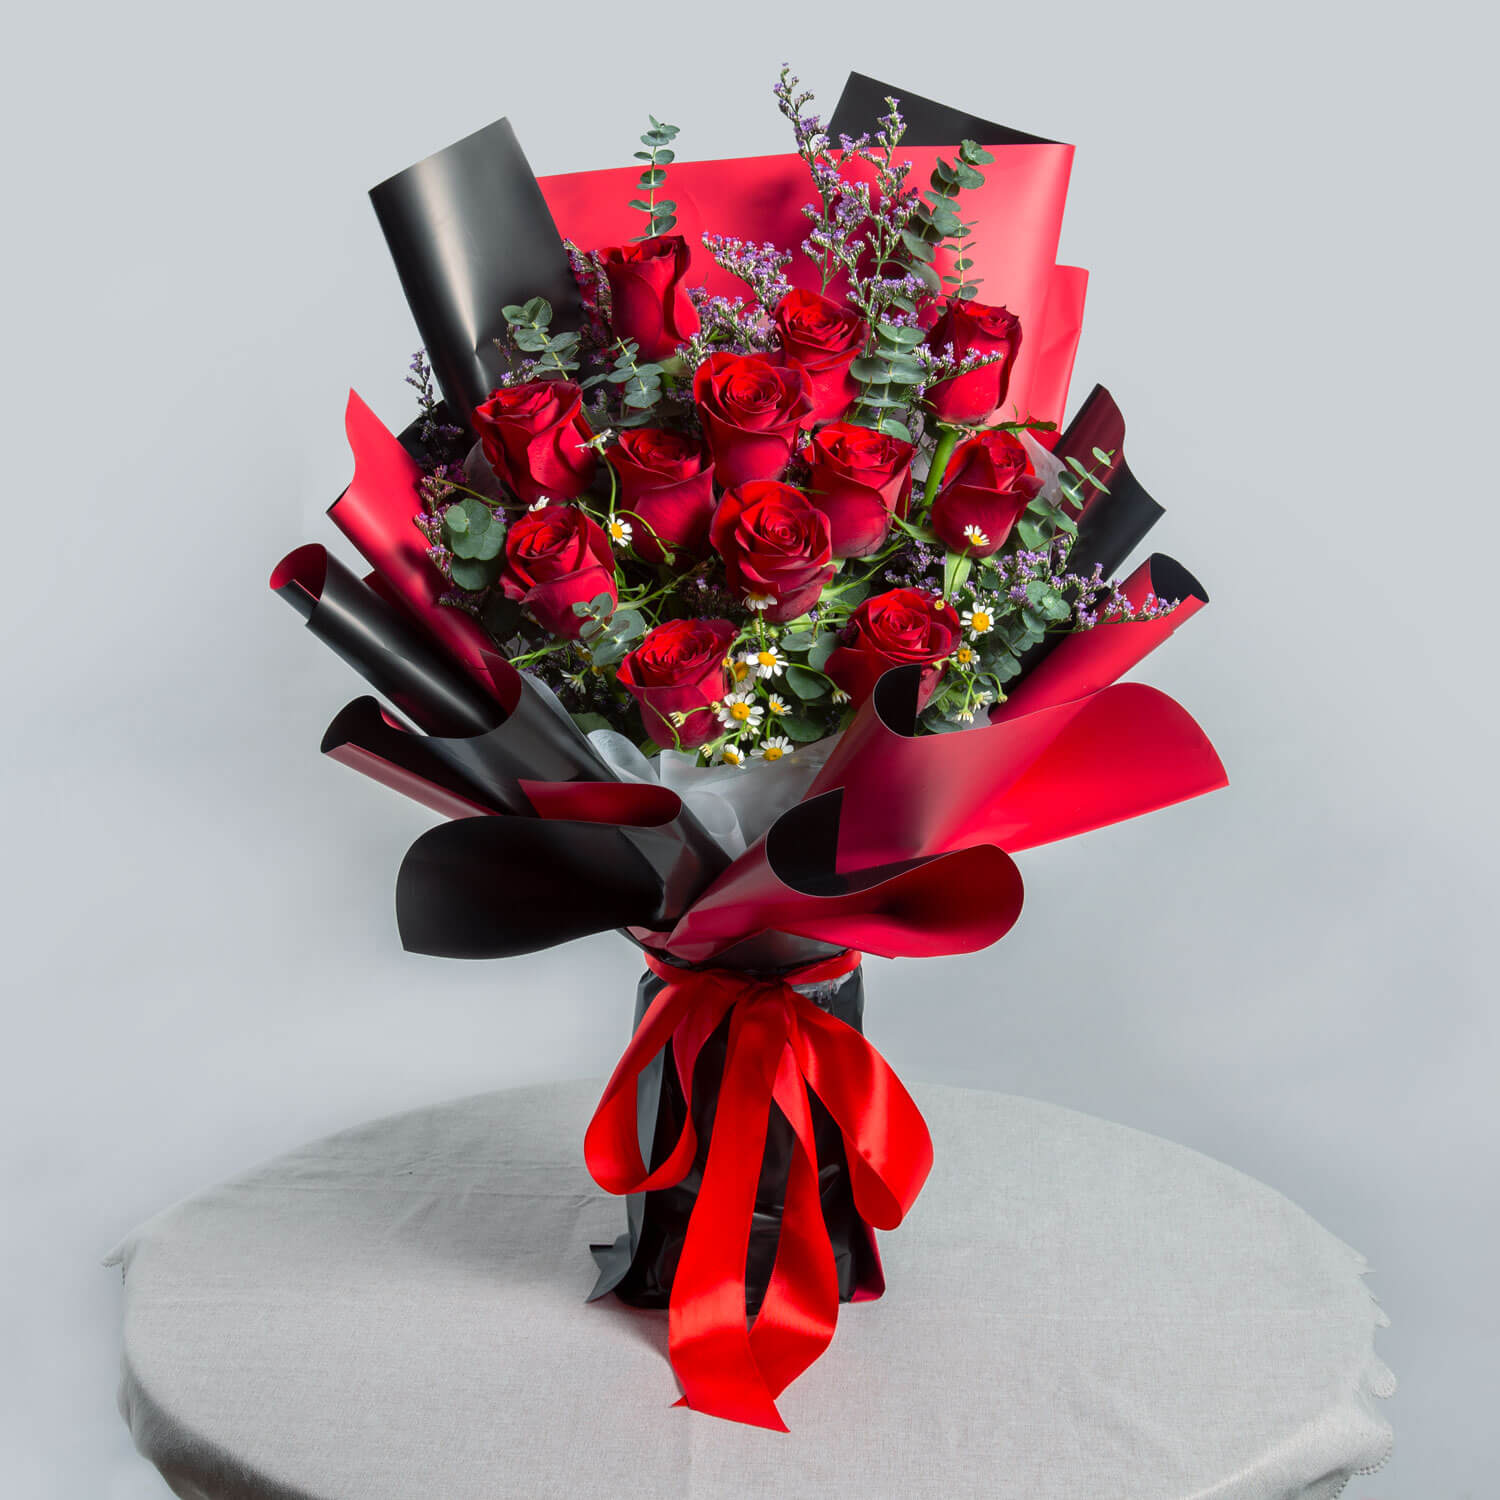 A Symphony of Scarlet: Crafting the Perfect Red Rose Bouquet